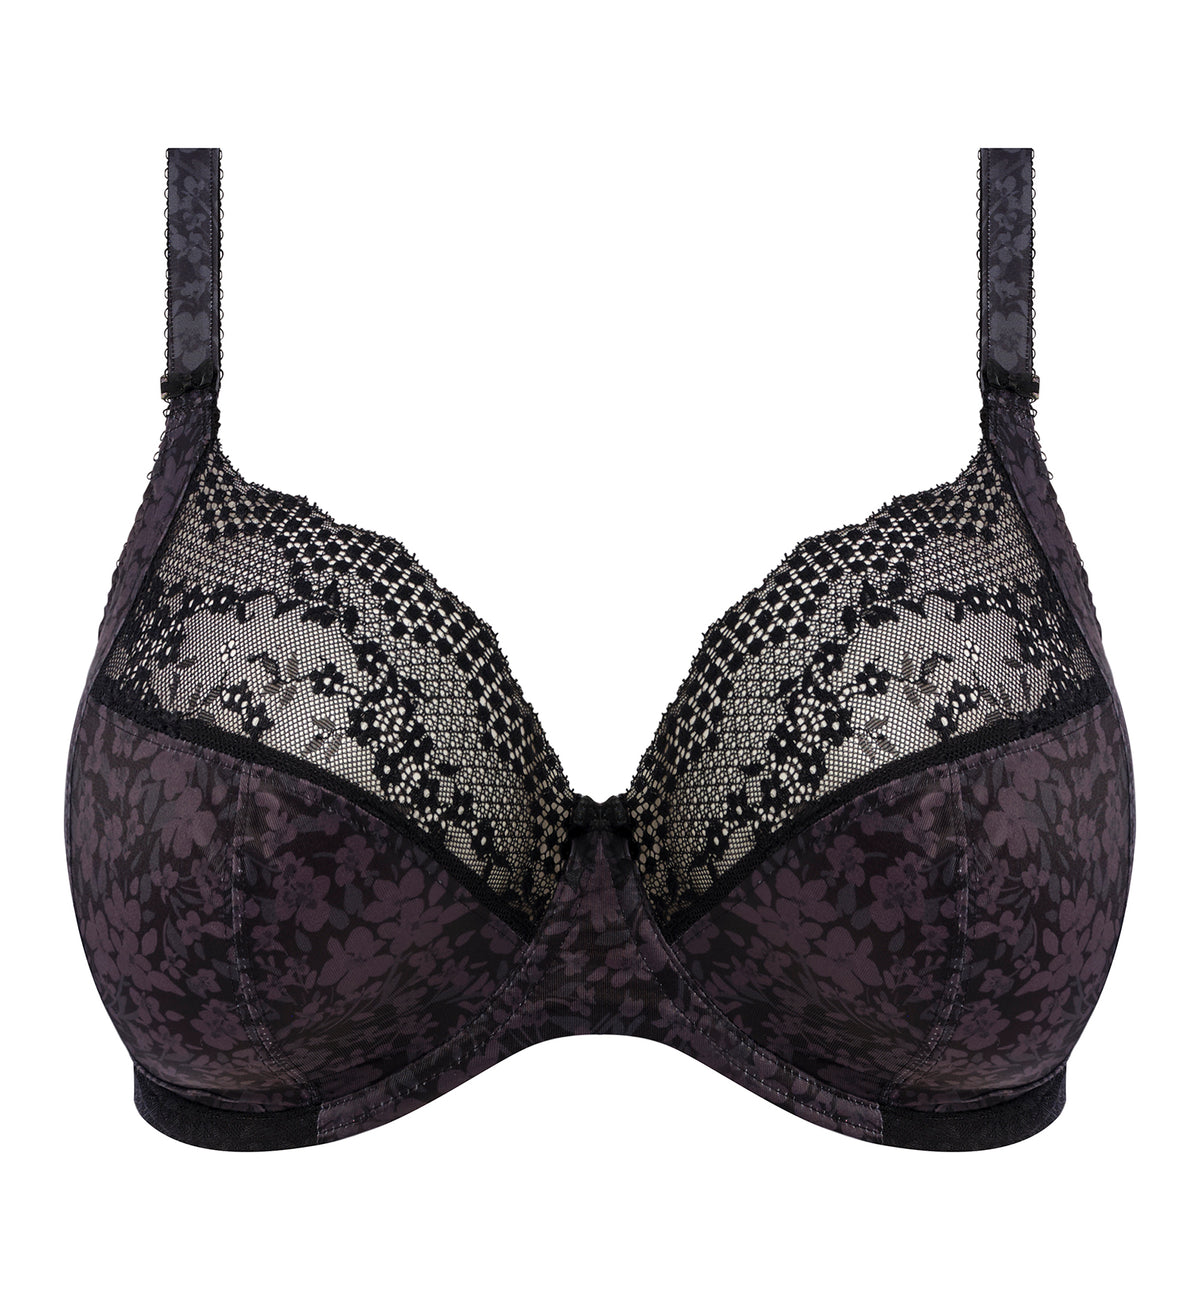 Elomi Lucie Banded Stretch Lace Plunge Underwire Bra (4490),32GG,Black - Black,32GG